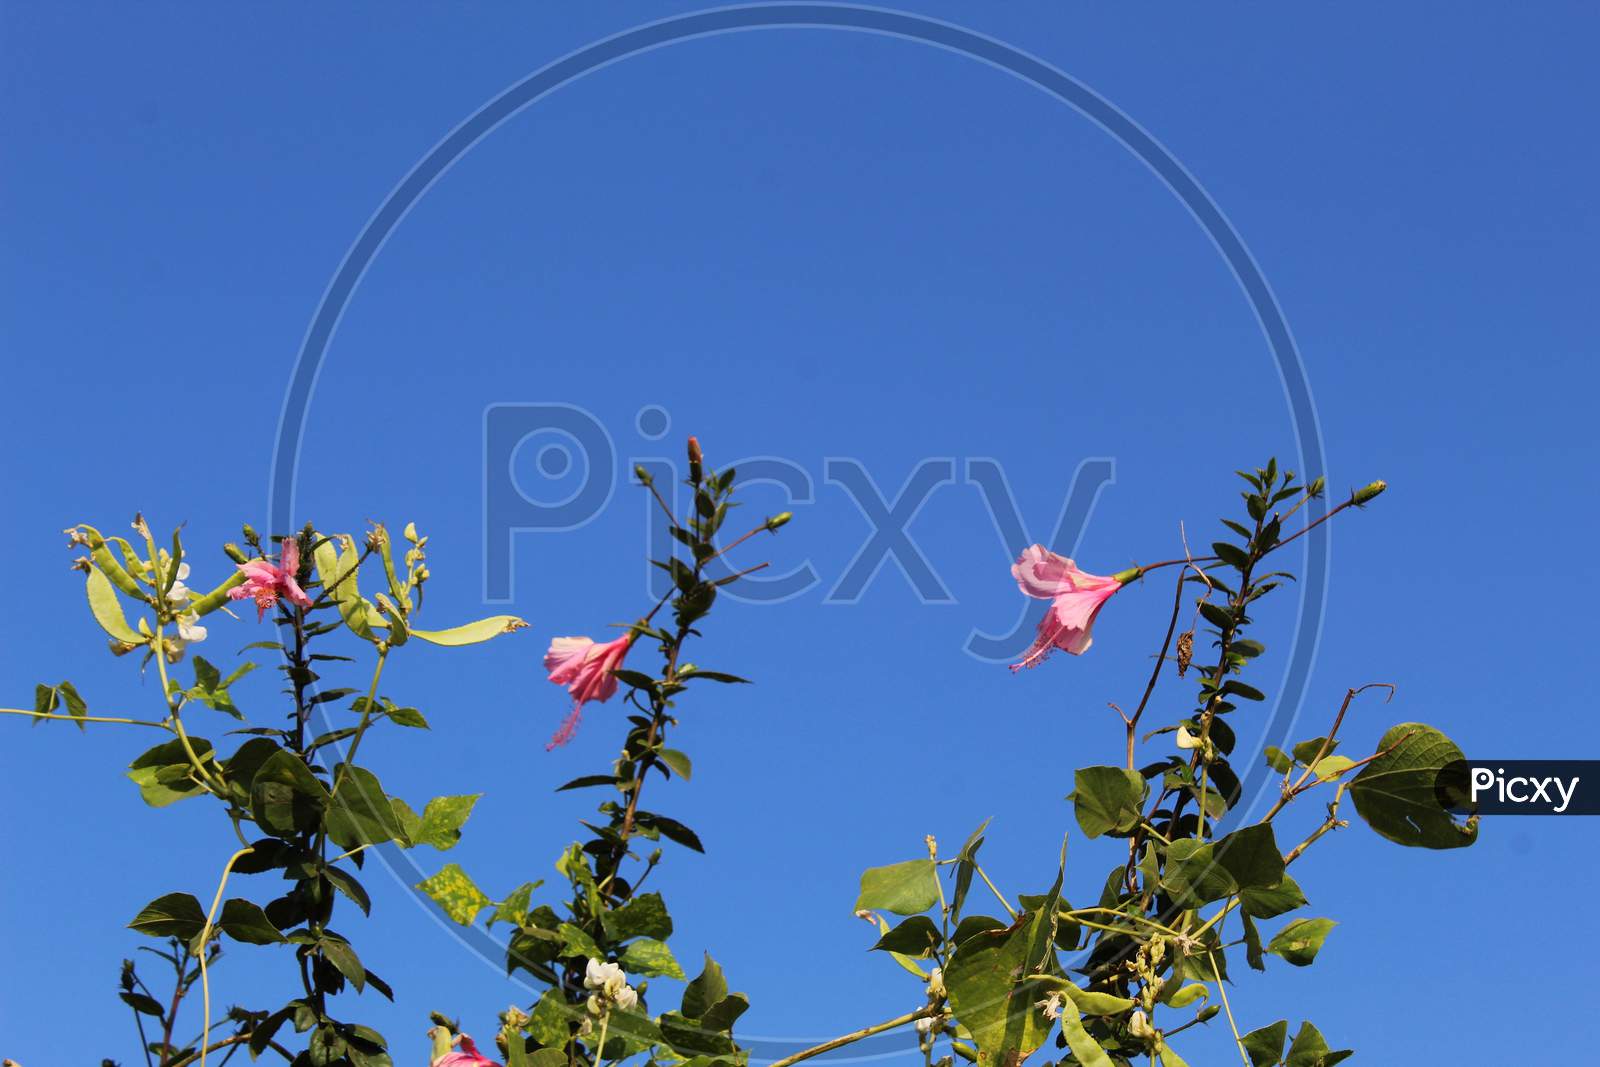 Pink hibiscus Flower with blue sky background.